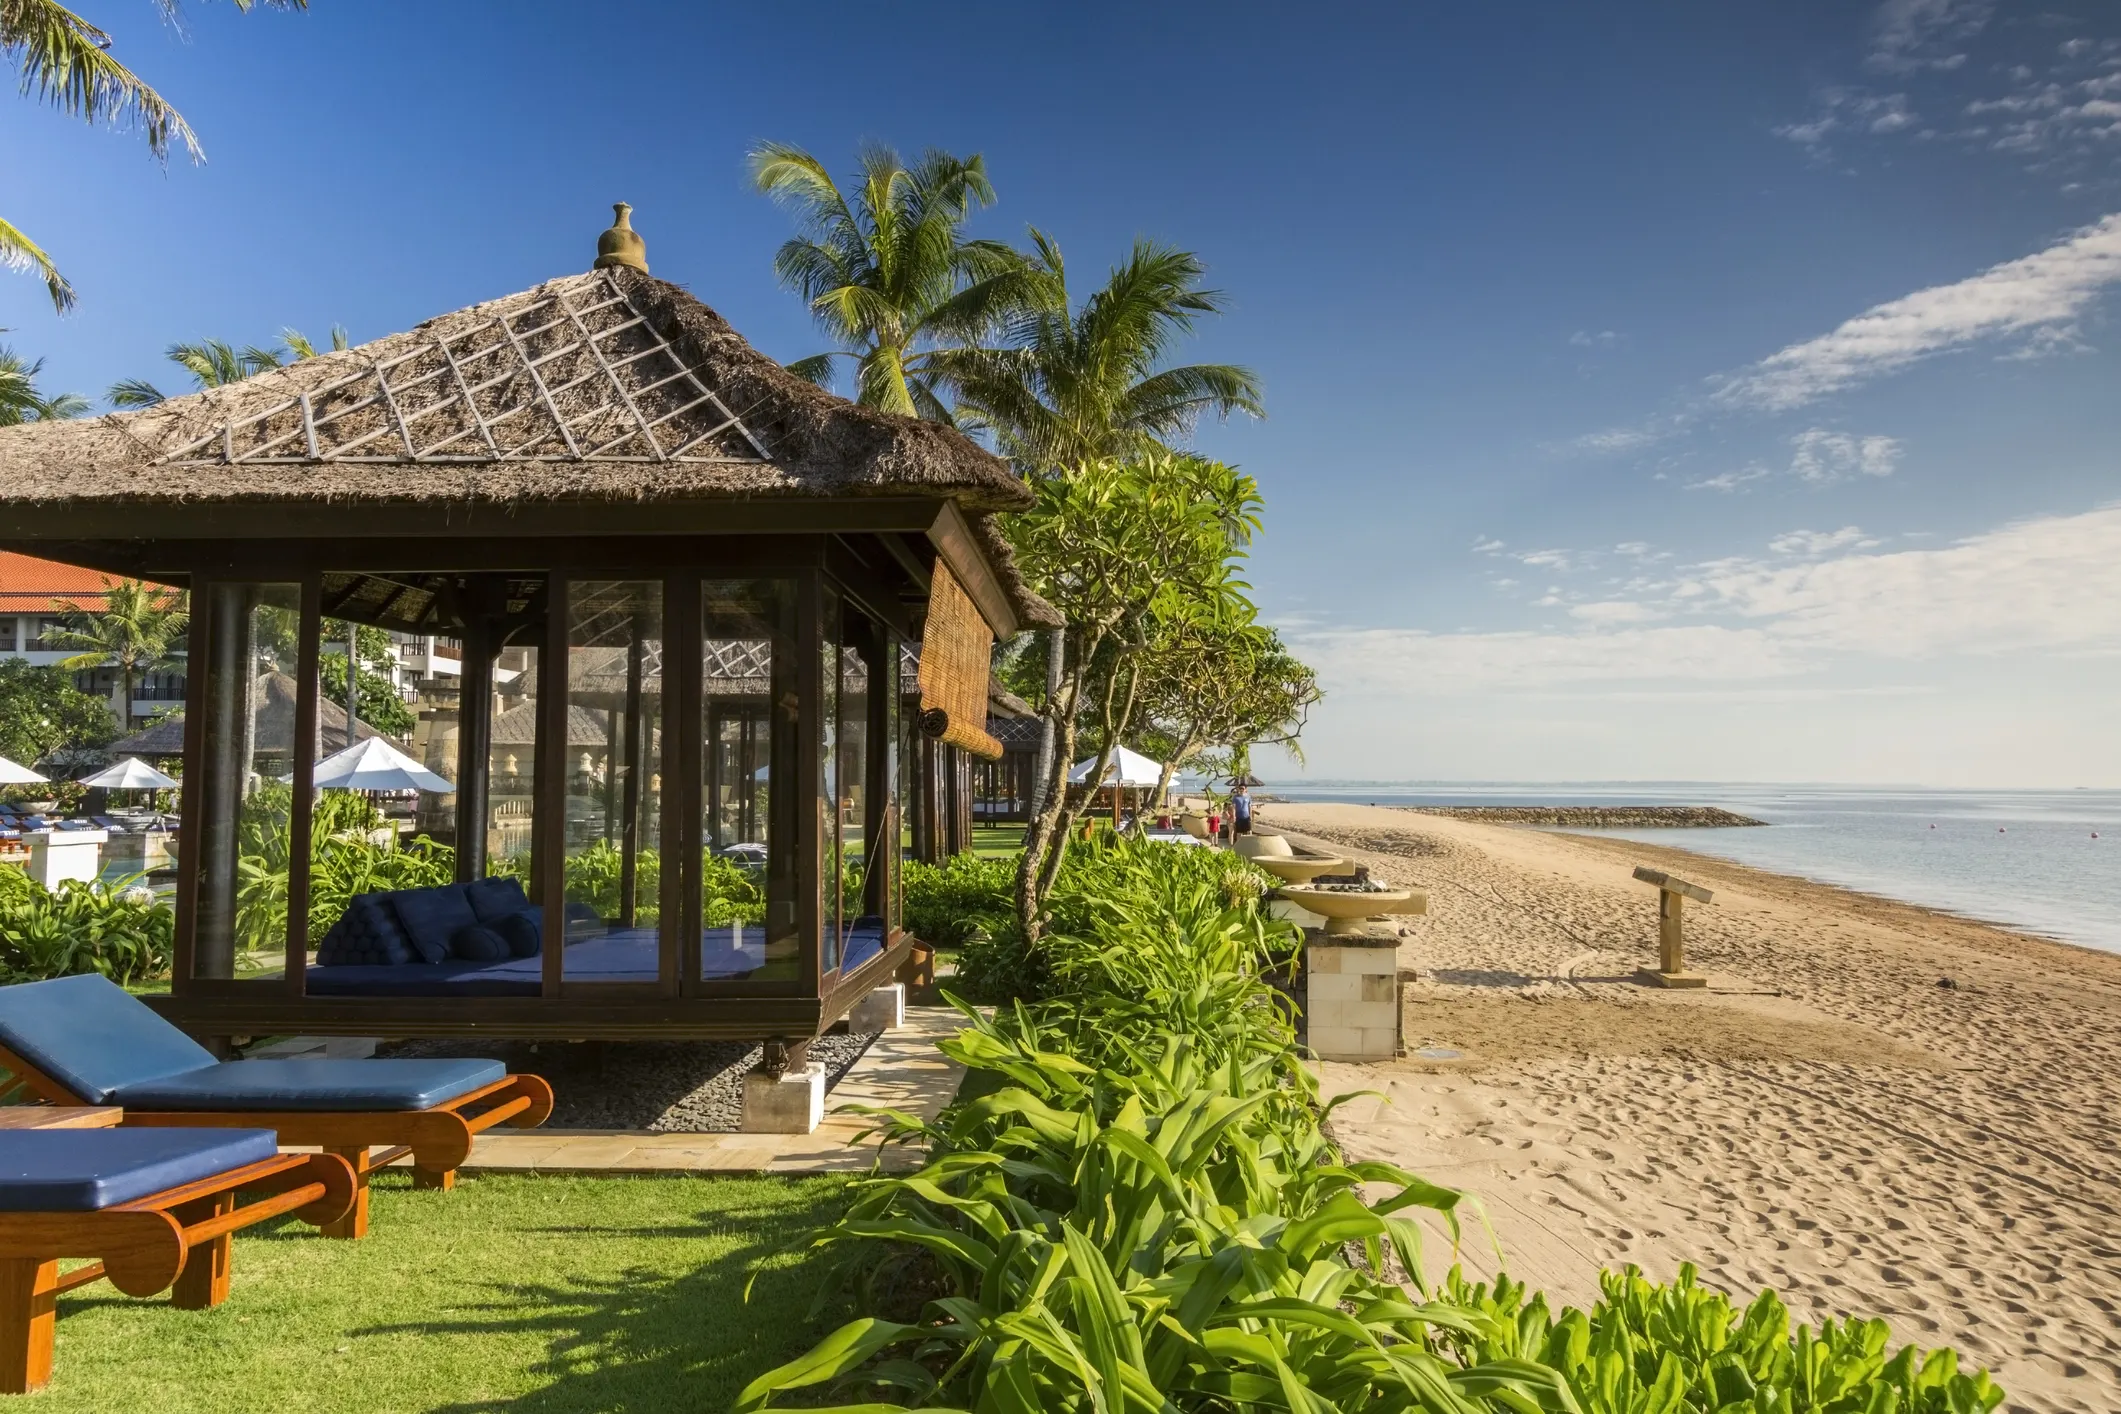 Bali's beaches beckon for relaxation.